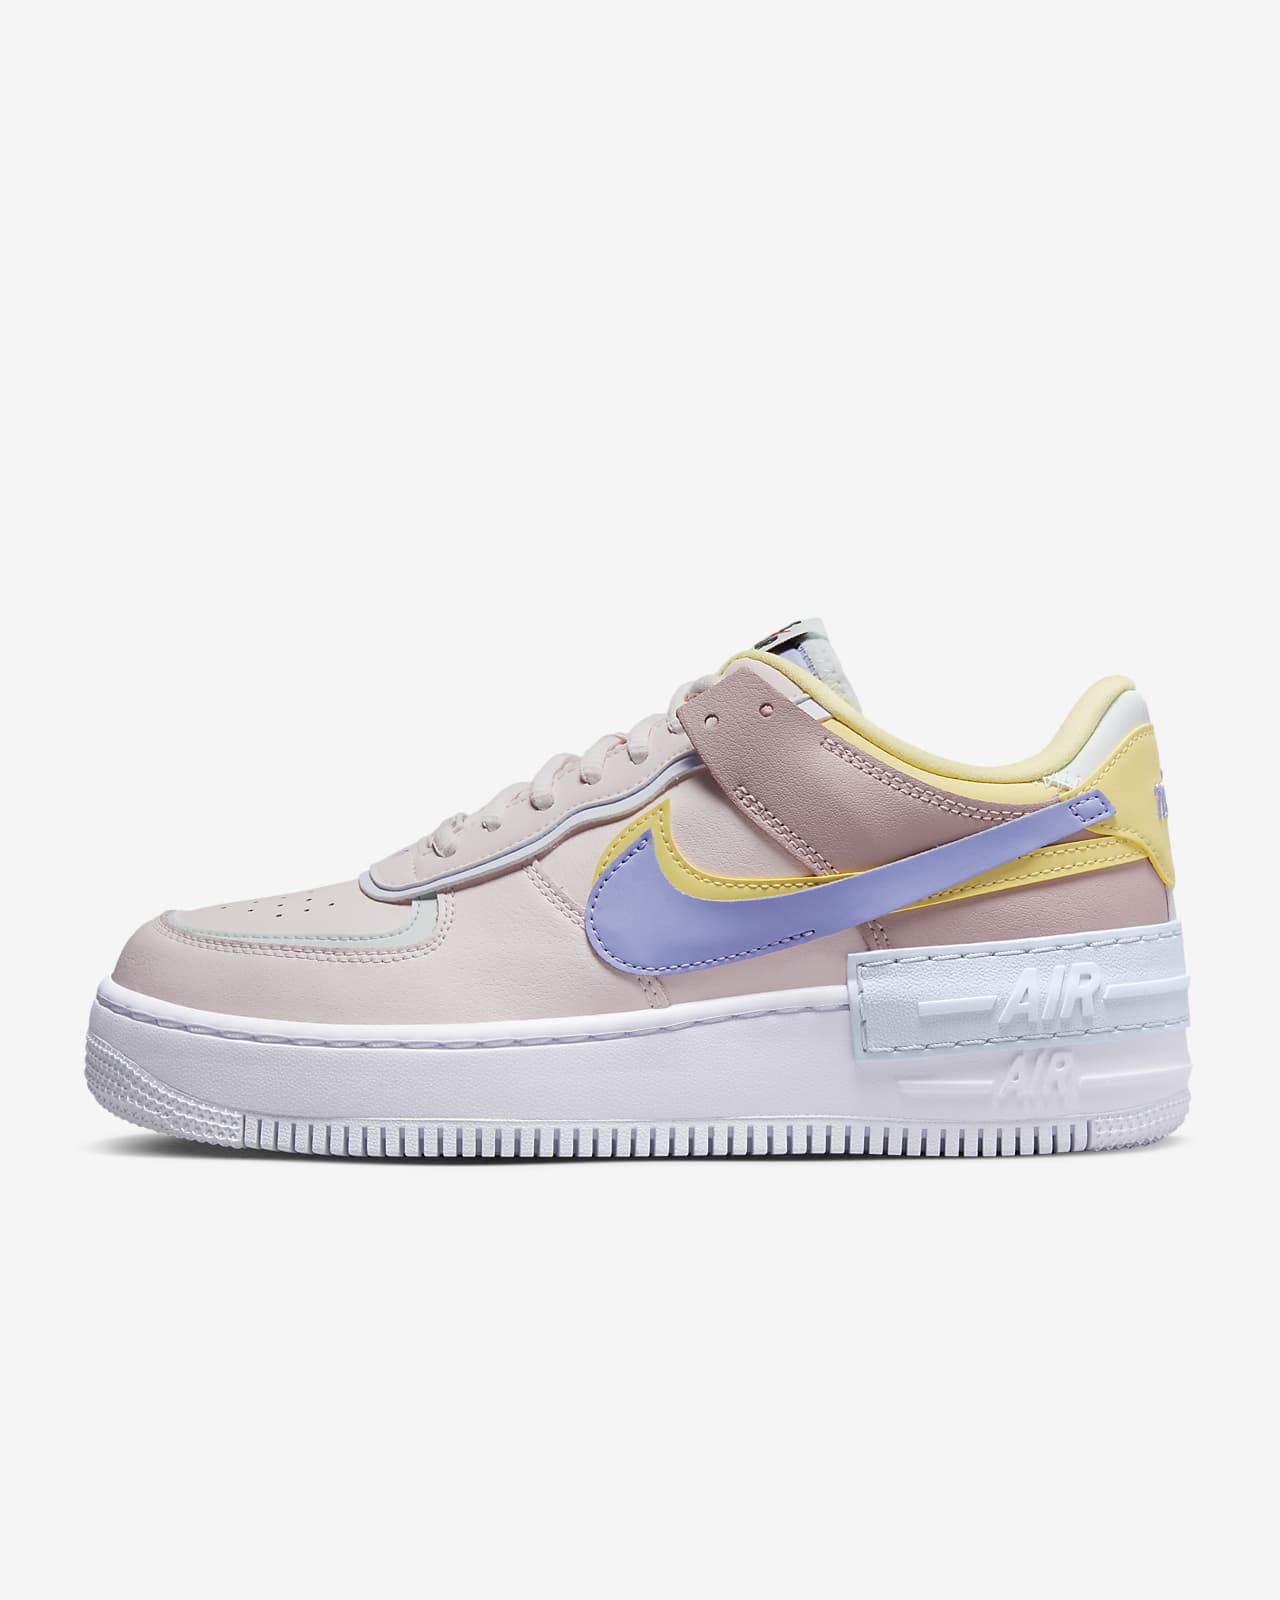 Take out Receiver Spanish Nike Air Force 1 Shadow Women's Shoes. Nike.com